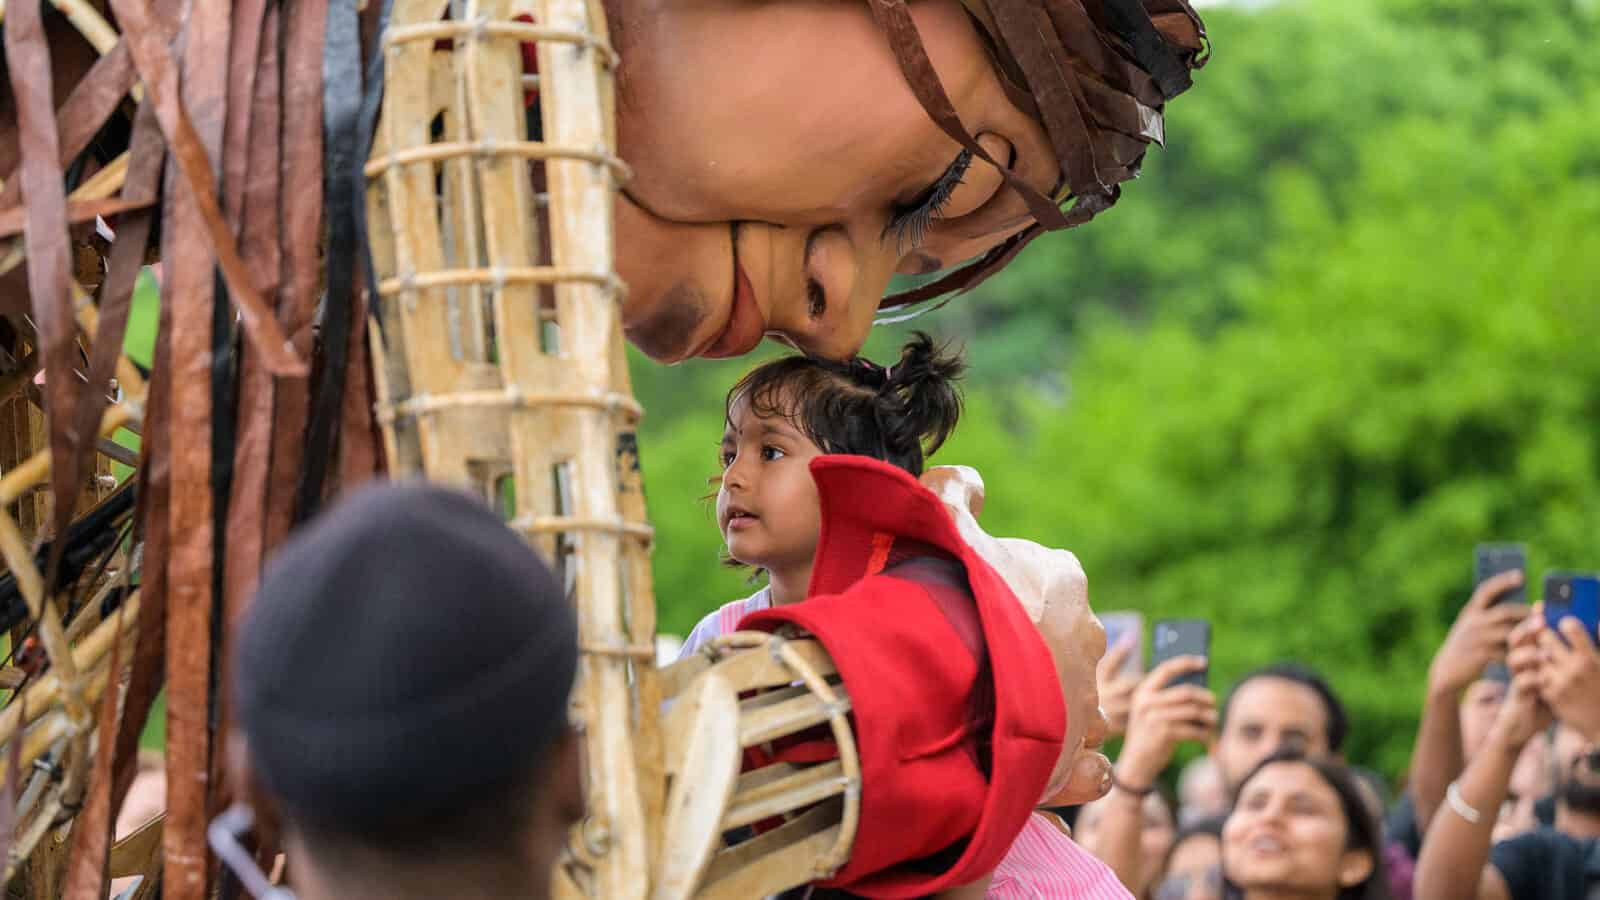 Amal - the 12-foot puppet and 10-year-old Syrian girl - welcomes a child in Toronto at the Luminato Festival - Press photo courtesy of The Walk Productions.